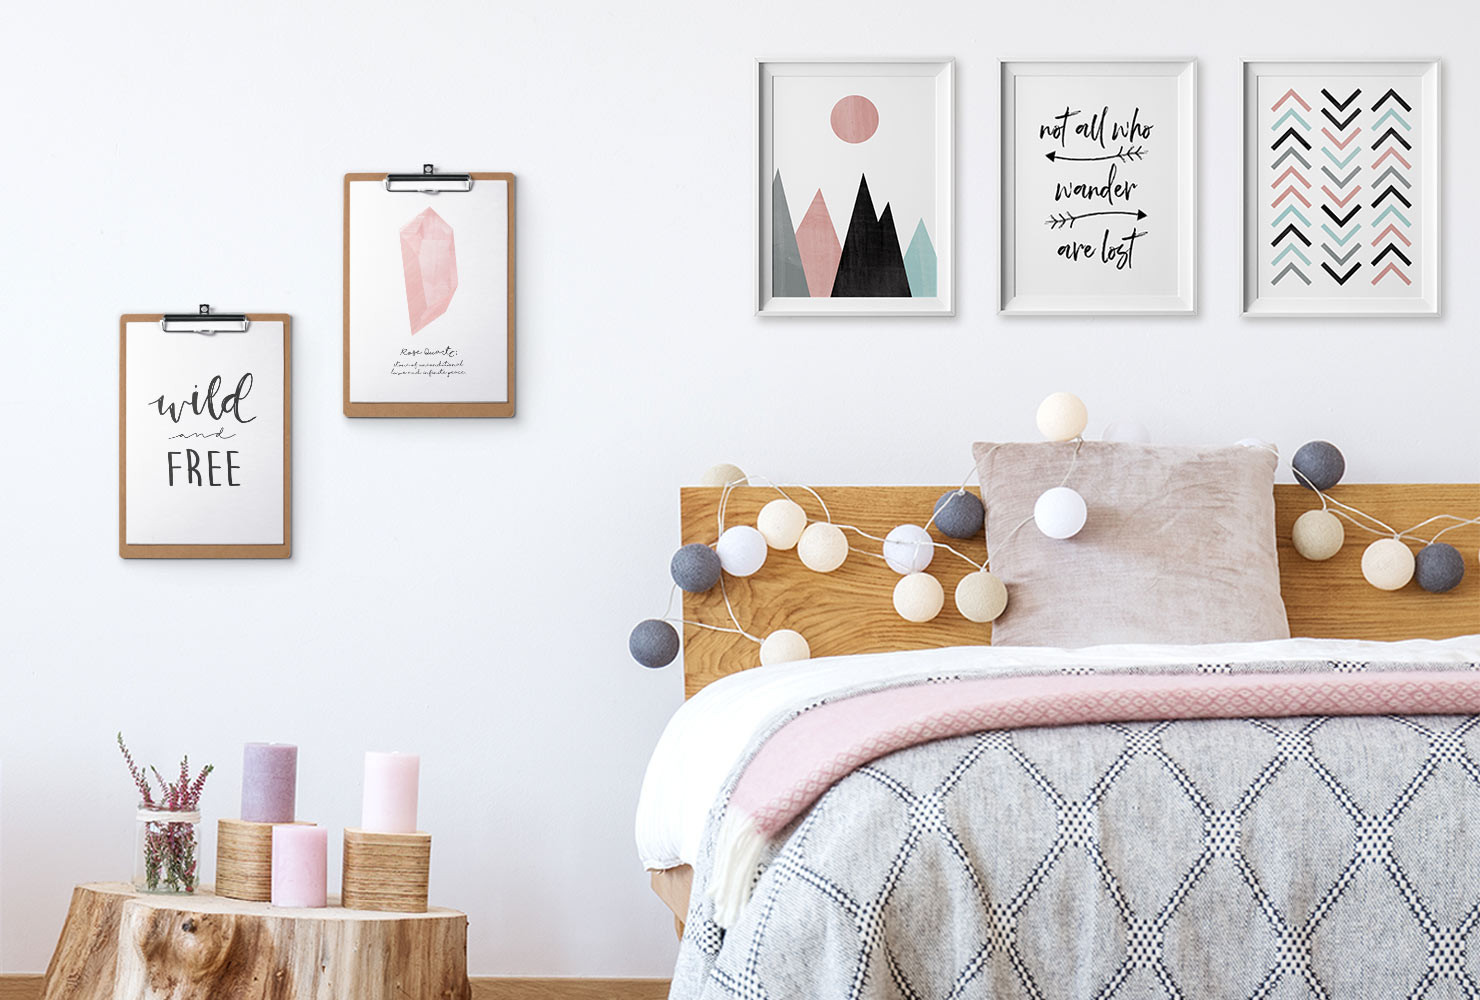 Diy Wall Decor For Bedroom
 24 DIY Bedroom Decor Ideas To Inspire You With Printables